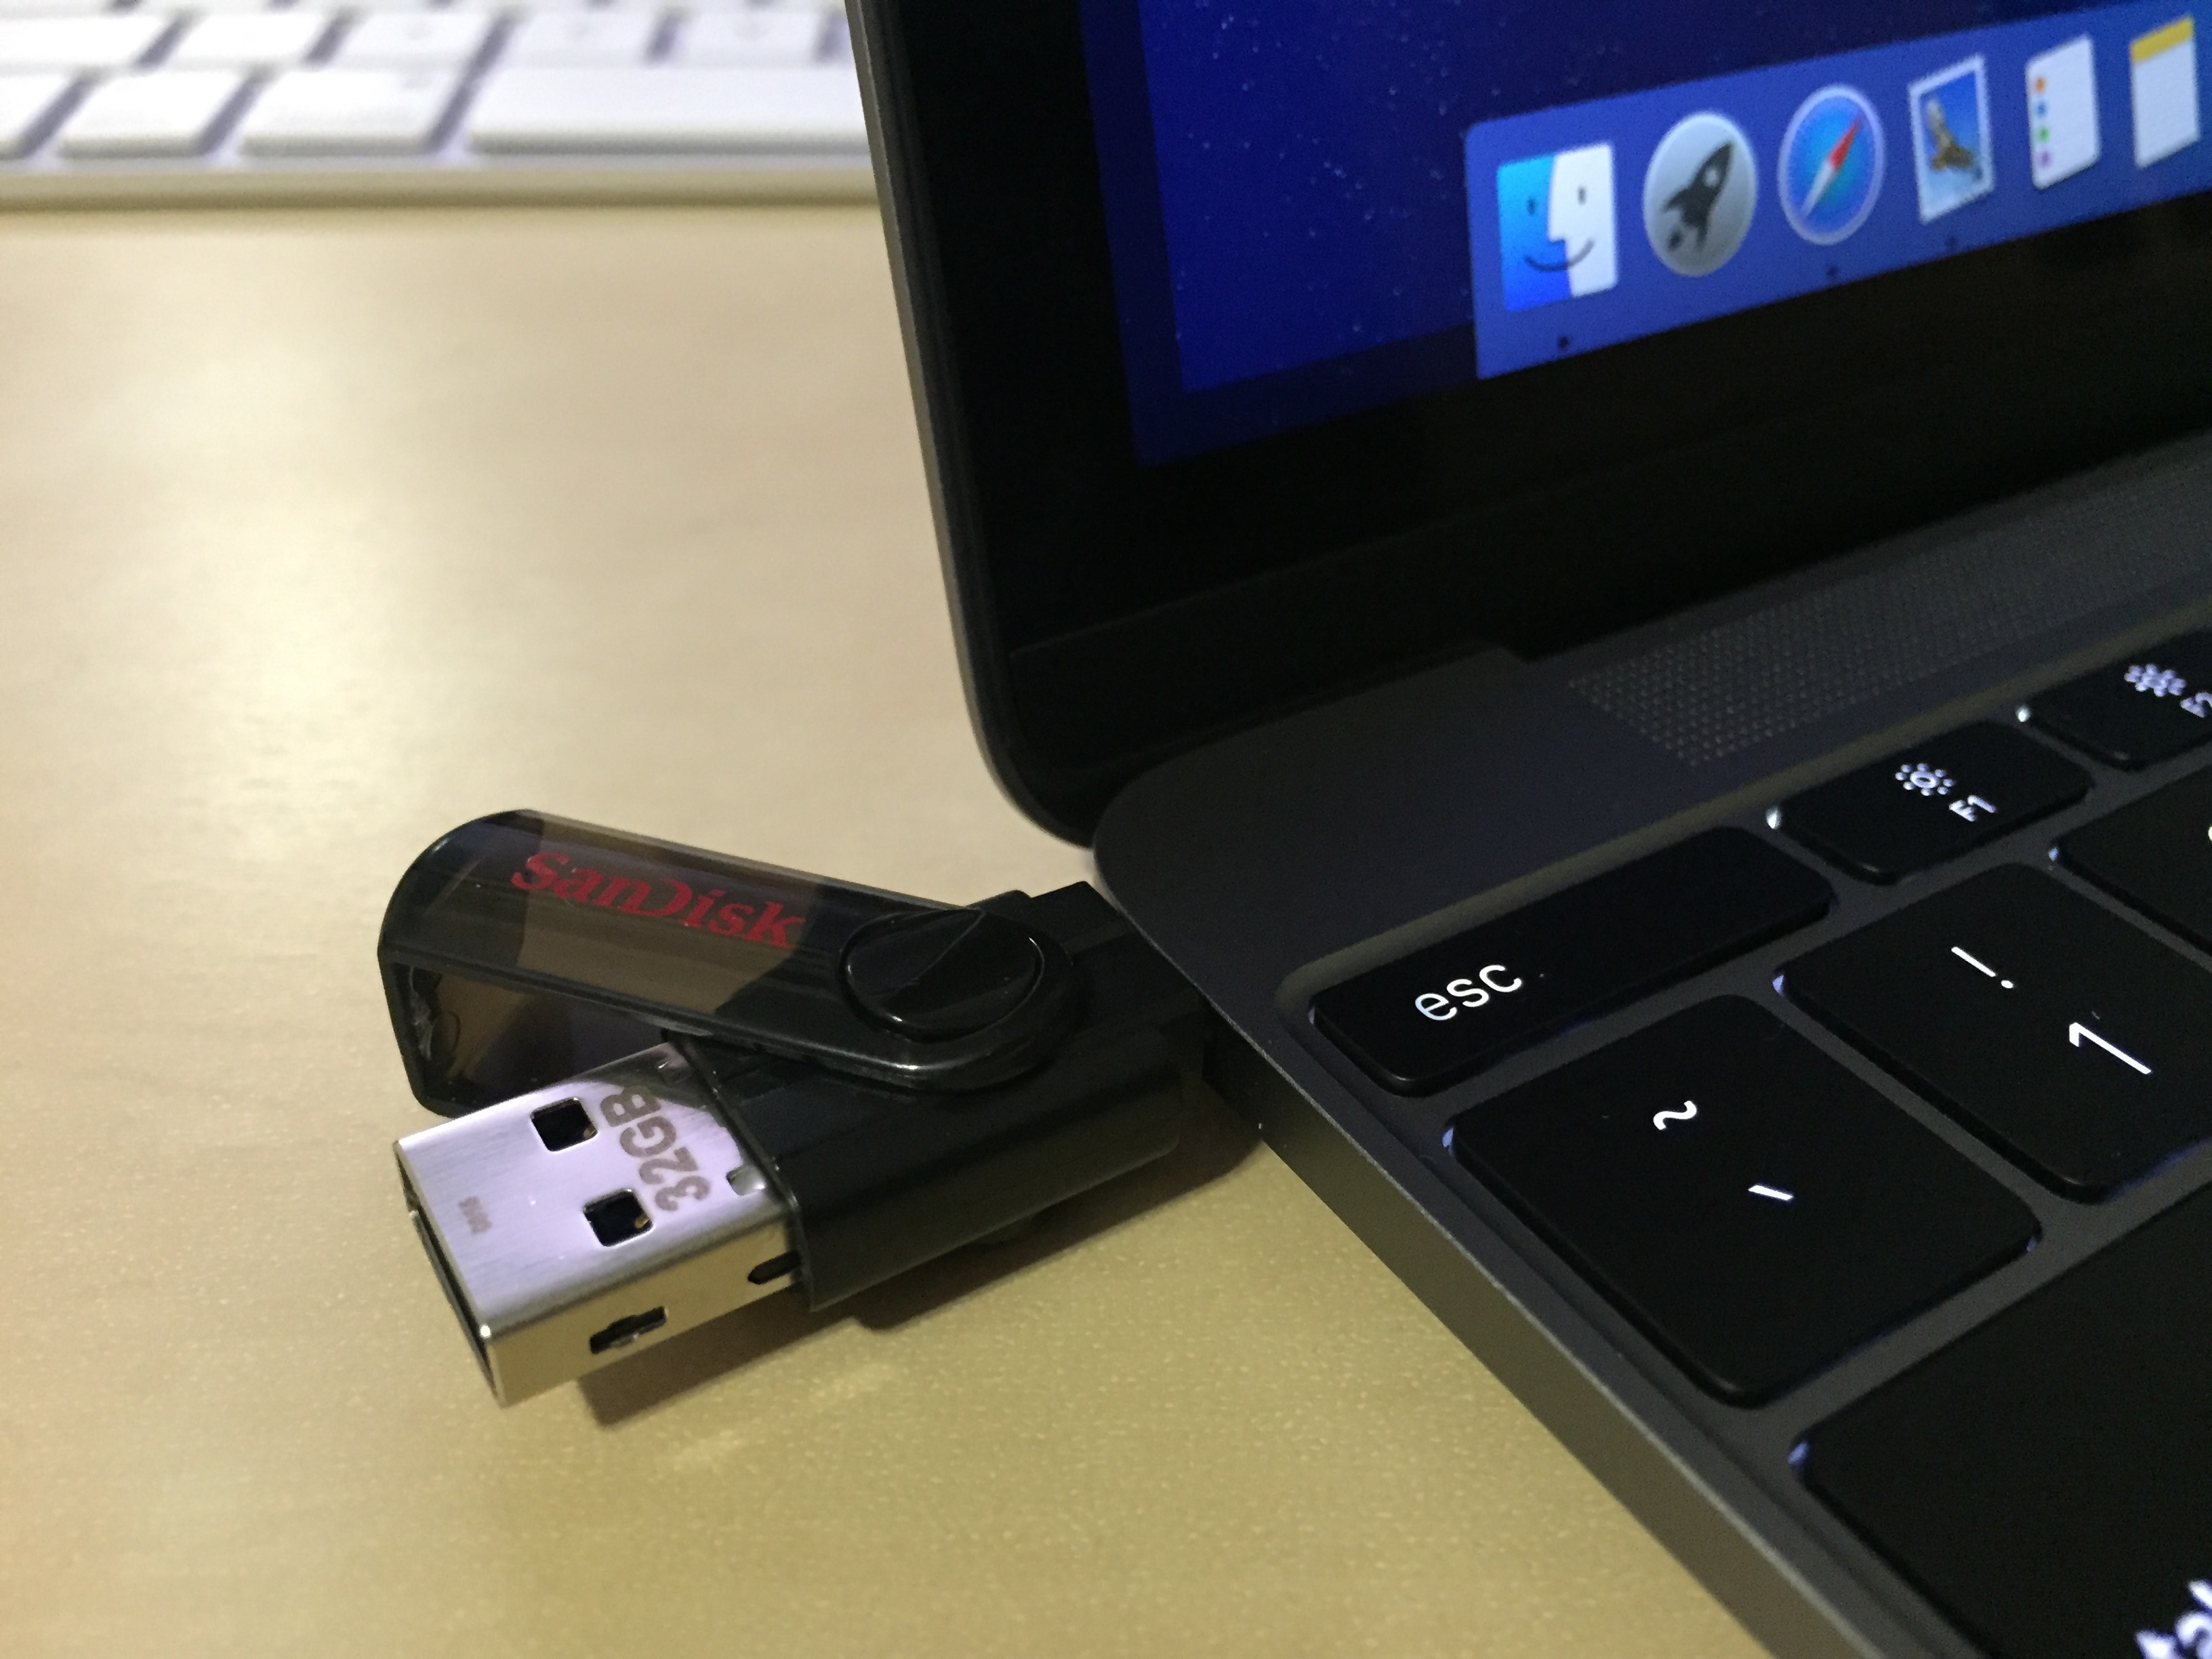 how to transfer files from macbook air to flash drive